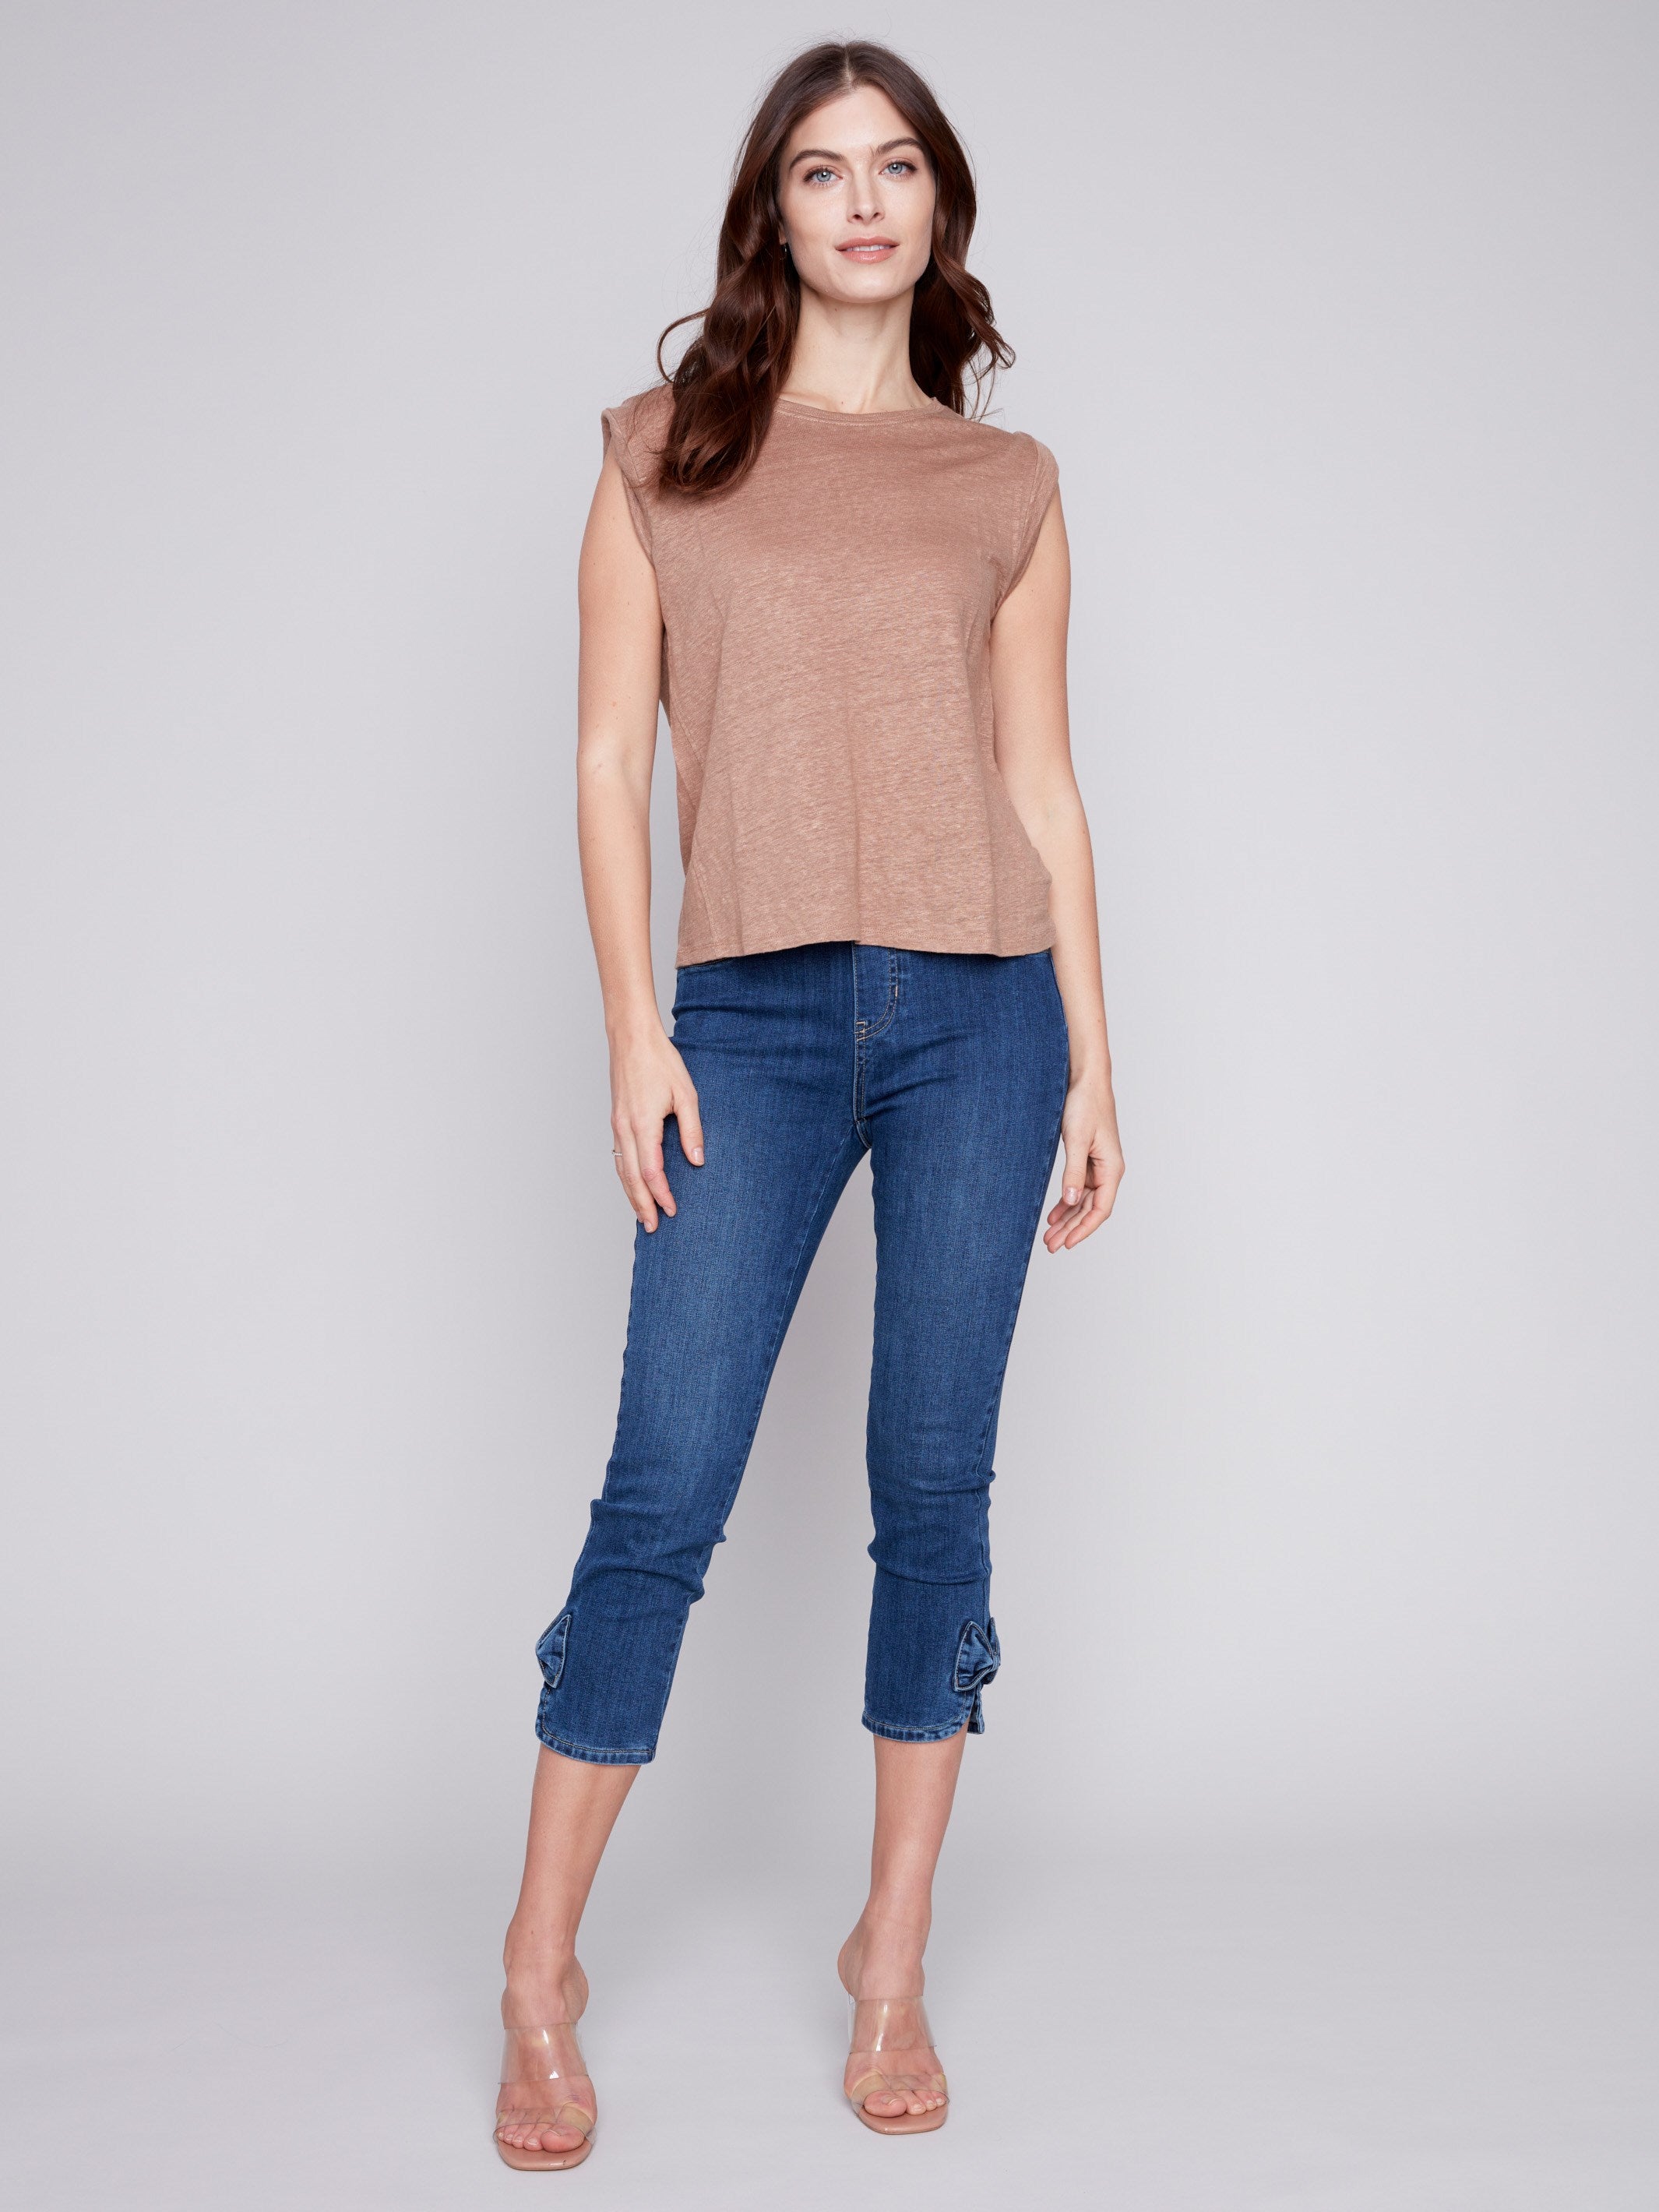 Linen Tank Top with Sleeve Detail - Caramel - Charlie B Collection Canada - Image 8